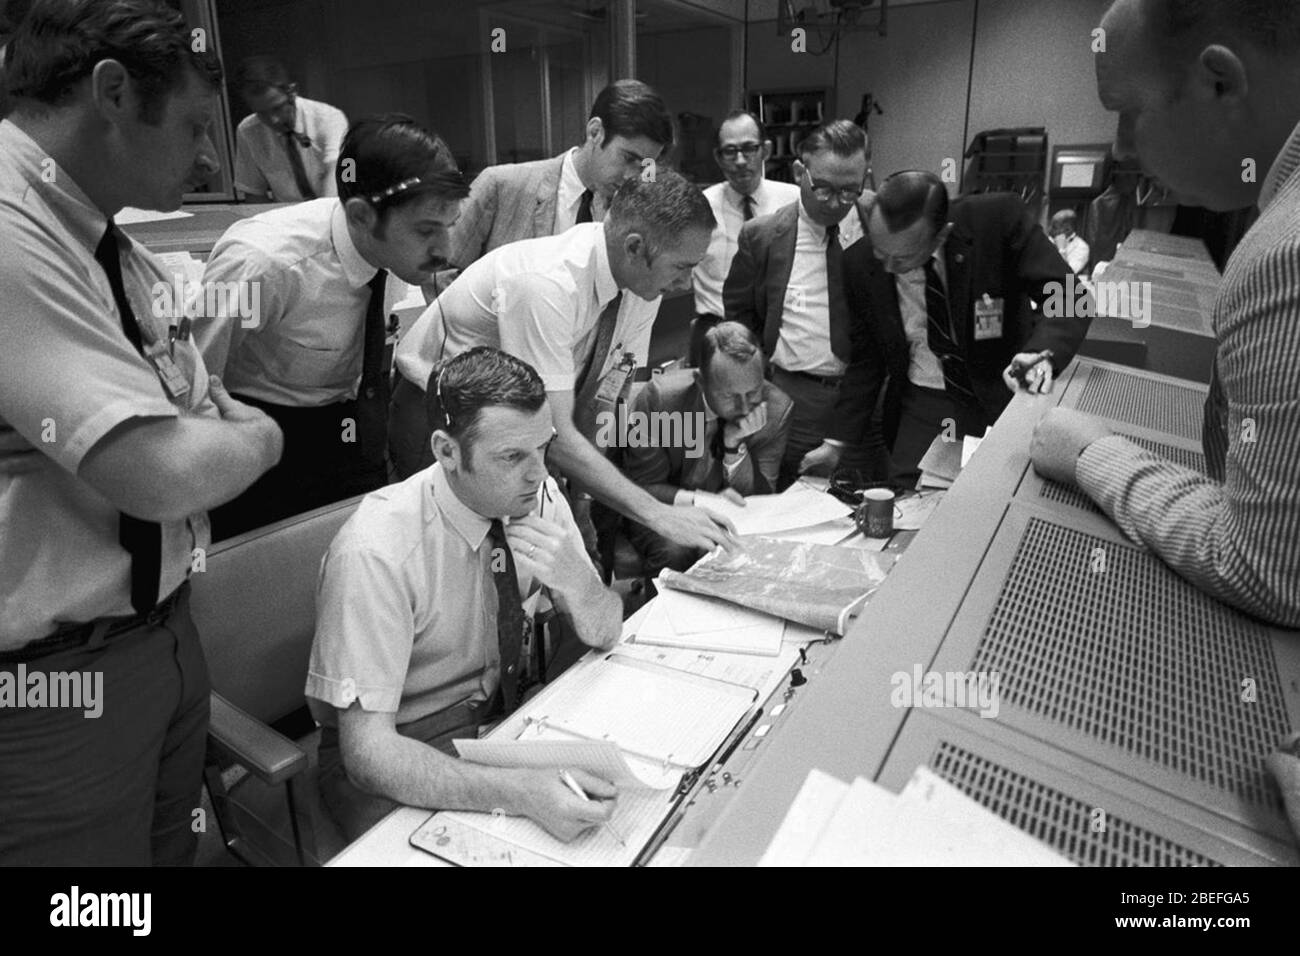 A group of flight controllers gathers around the console of Glynn S. Lunney (seated, nearest camera), Shift 4 flight director, in the Mission Operations Control Room (MOCR) of Mission Control Center (MCC), located in Building 30 at the Manned Spacecraft Center (MSC). Among those looking on is Dr. Christopher C. Kraft, deputy director, MSC, standing in a black suit, on the right. When this photograph was taken, the Apollo 13 lunar landing mission had been canceled, and the problem-plagued Apollo 13 crew members were in trans-Earth trajectory attempting to bring their crippled spacecraft back ho Stock Photo